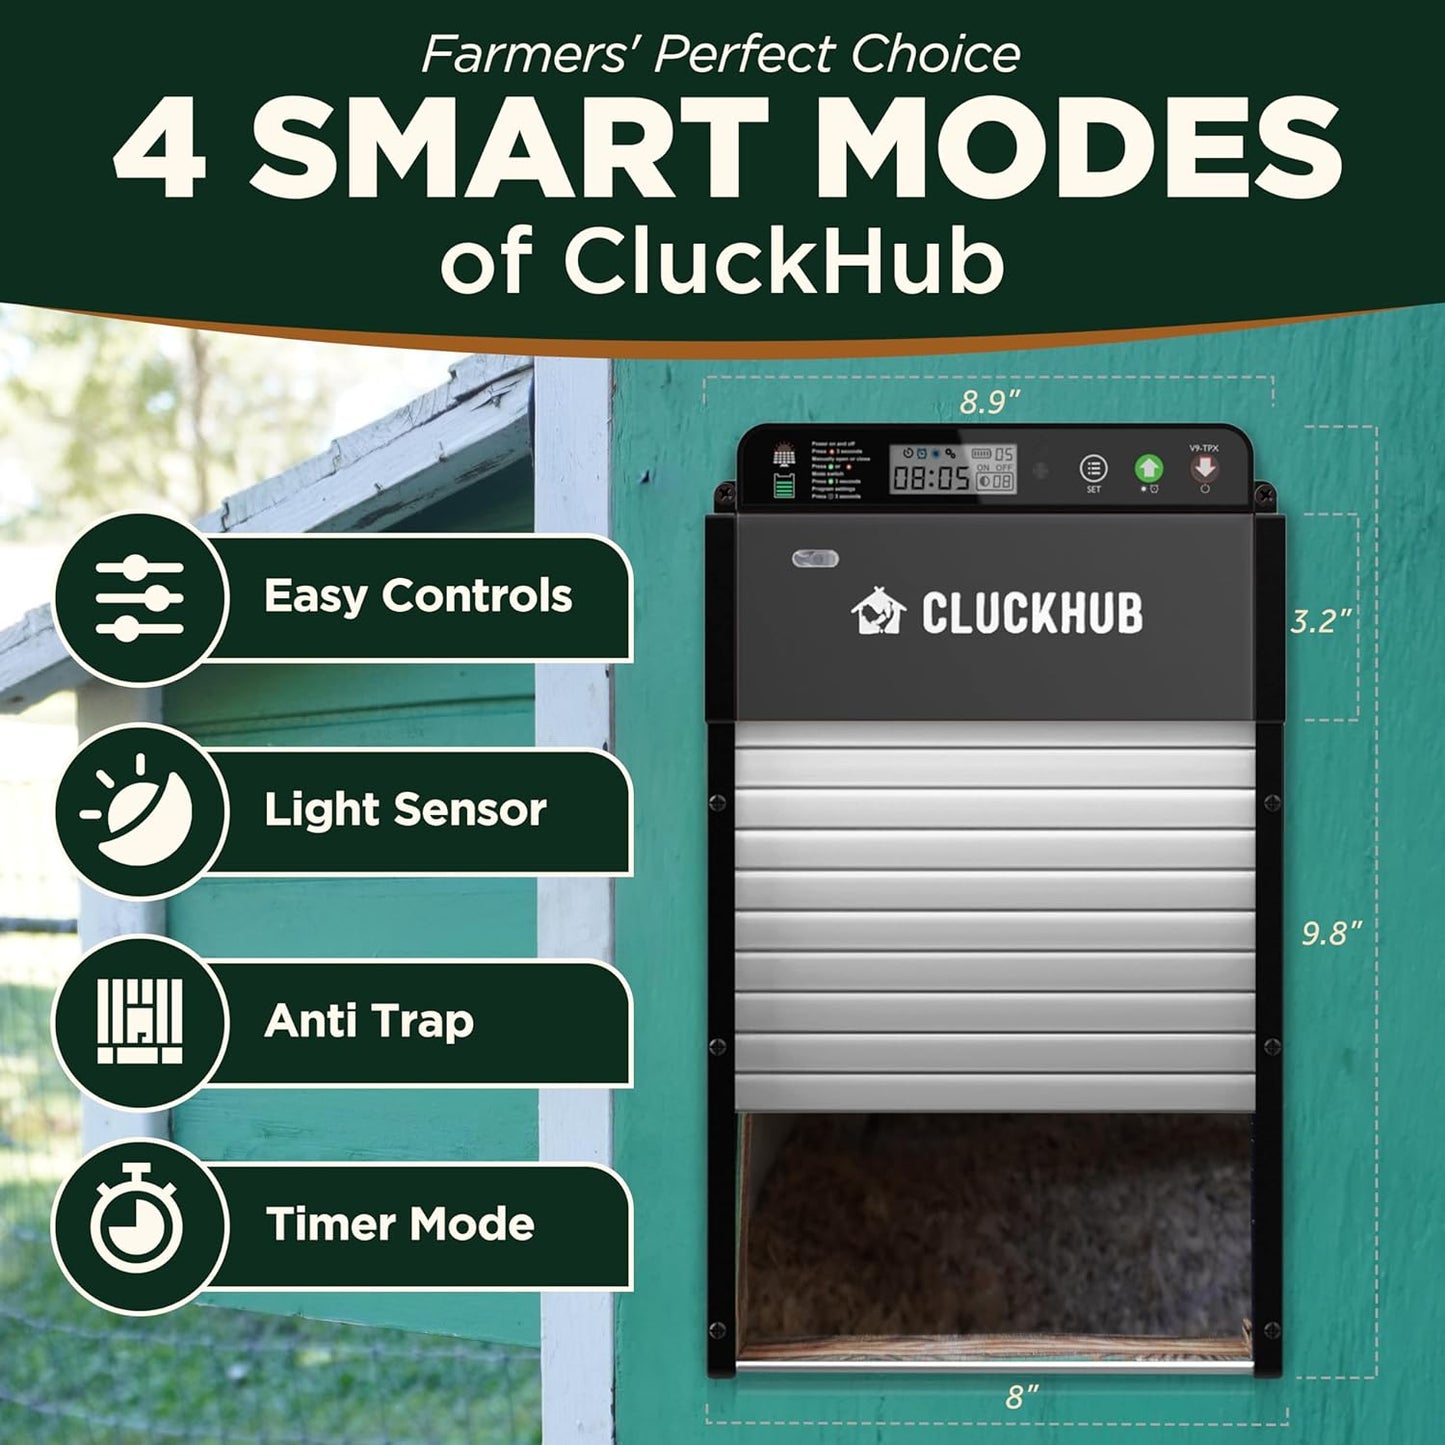 CluckHub Automatic Chicken Coop Door - Solar Powered, Electric Opener, Light Sensor w/Timer, Anti-Trap, Multi-Modes | Aluminum, Weather-Resistant | Own Control Panel